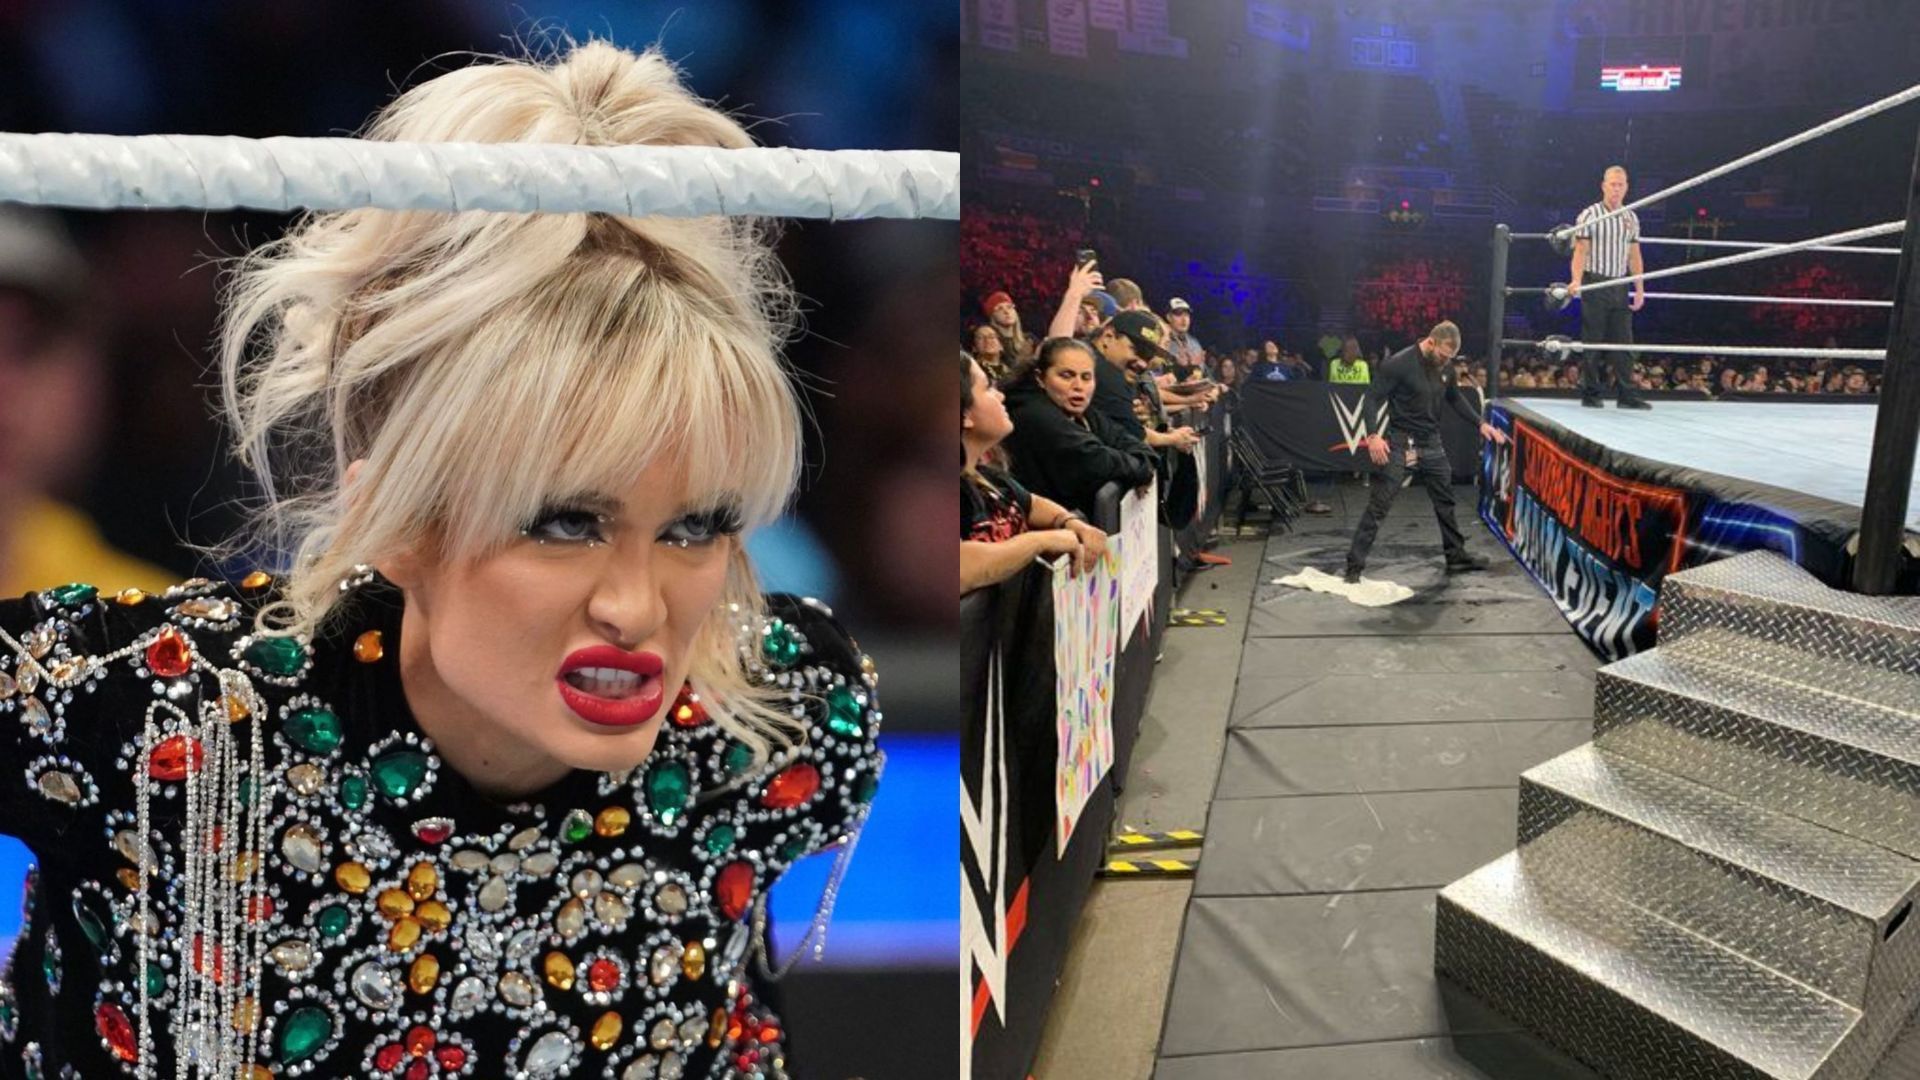 A fan threw a drink at Scarlett Bordeaux at a WWE live event